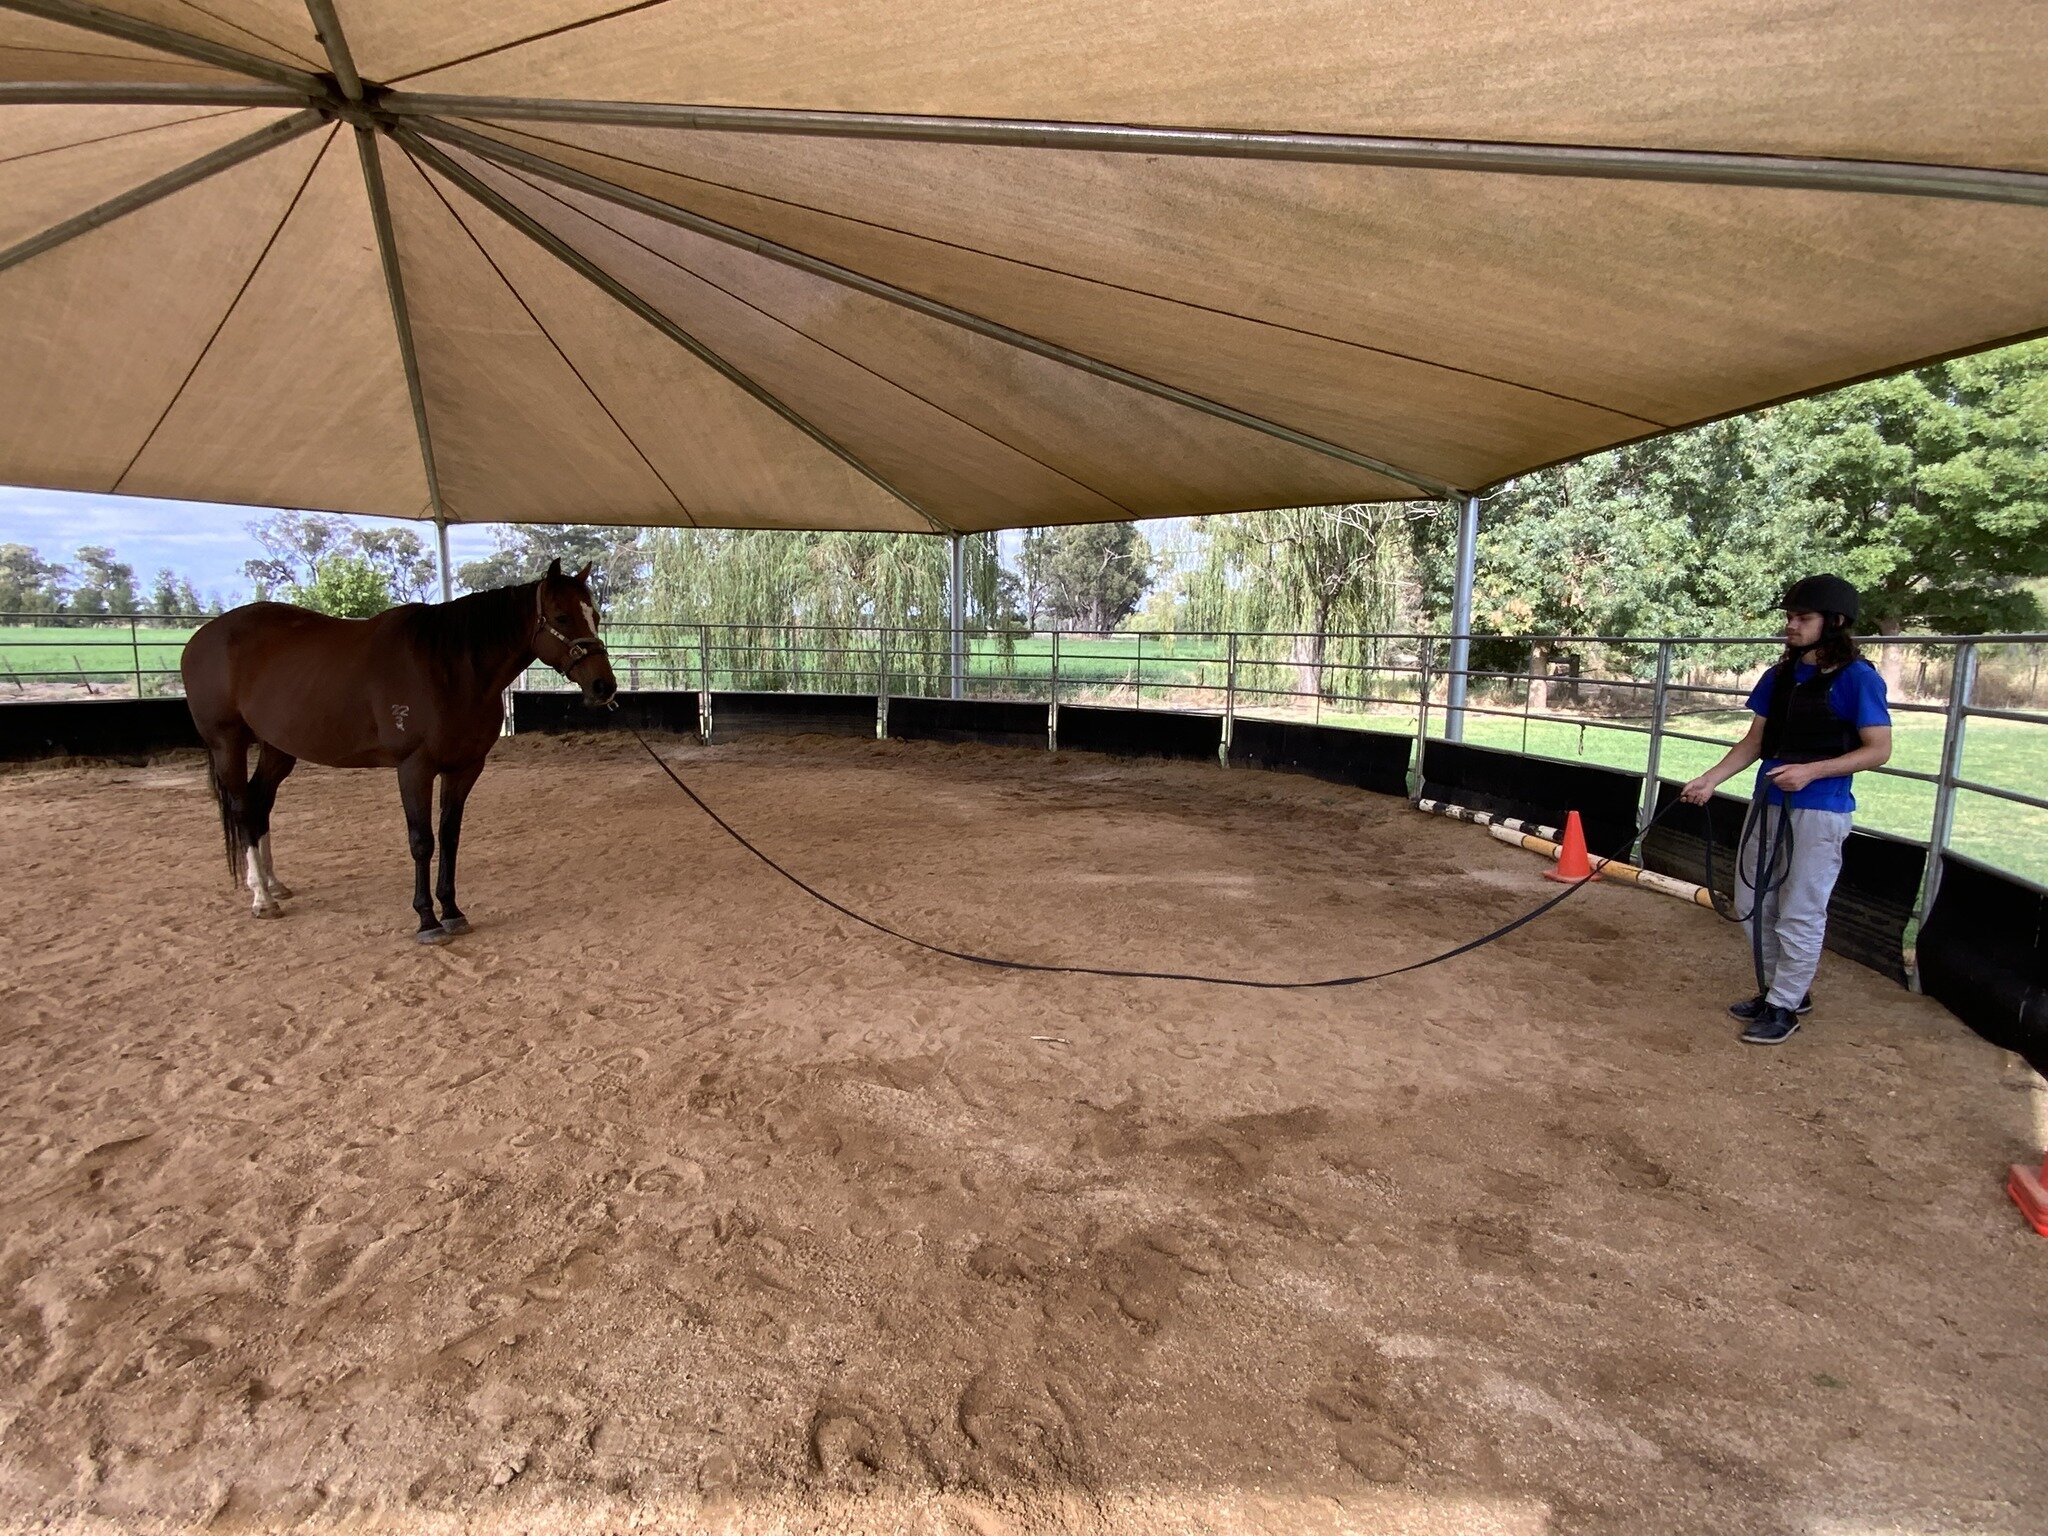 Learning to happily stand in his own space. 

Thanks to some extra special support from a participant, Archie learnt to feel confident and comfortable standing all by himself.

Archie is one of our newest horses to join the program, and today was onl